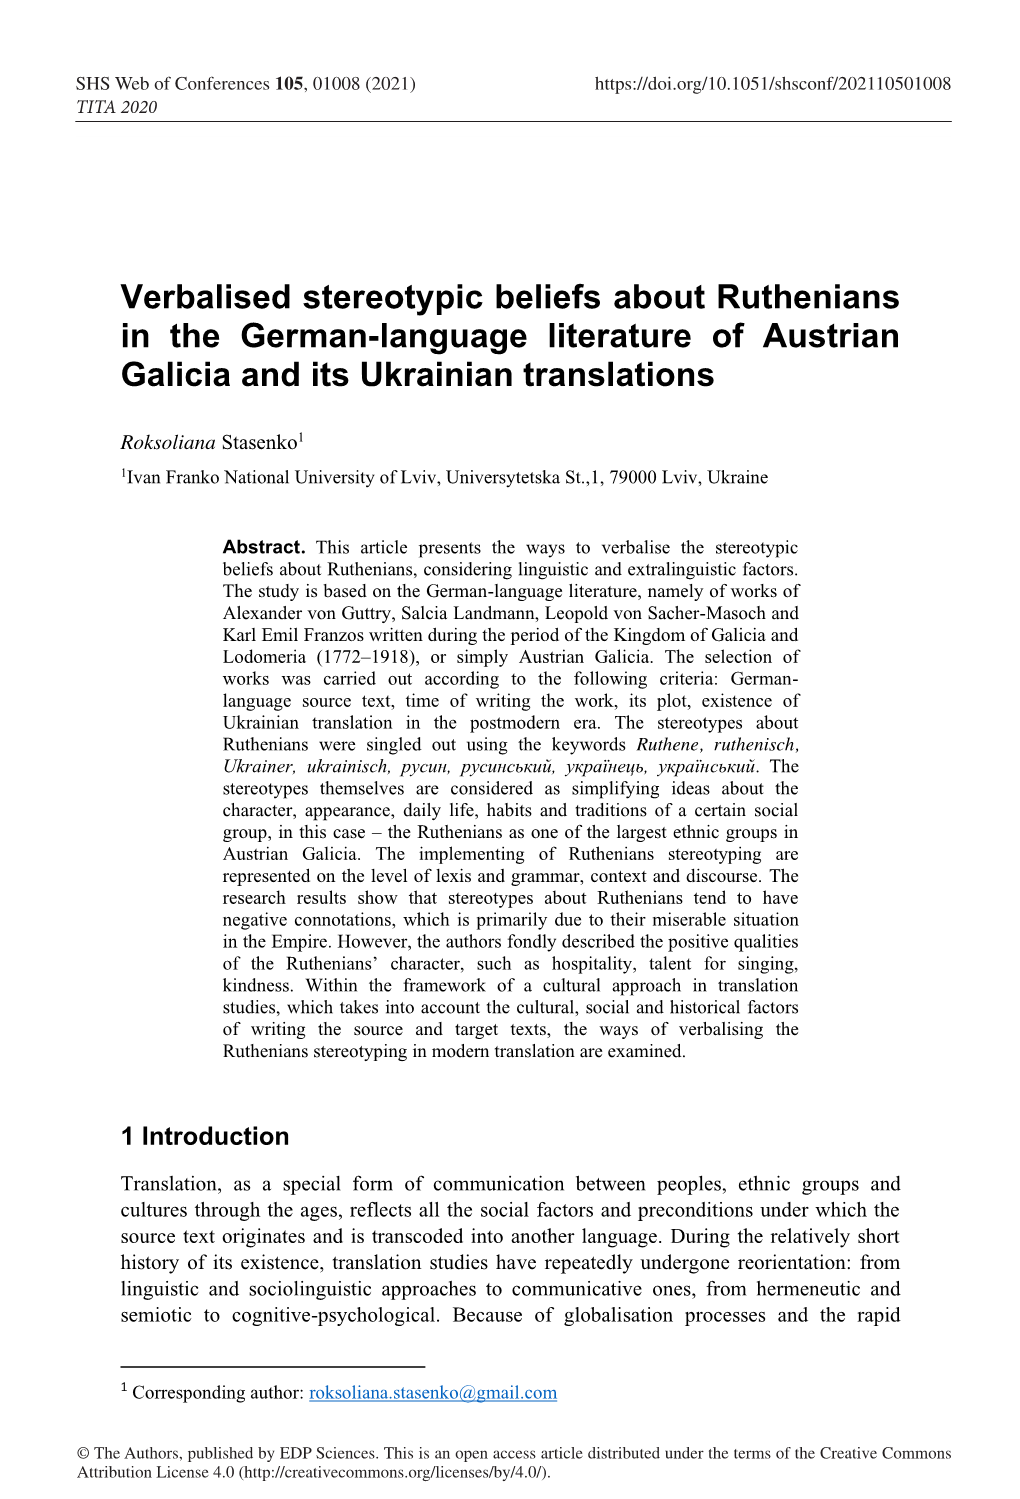 Verbalised Stereotypic Beliefs About Ruthenians in the German-Language Literature of Austrian Galicia and Its Ukrainian Translations